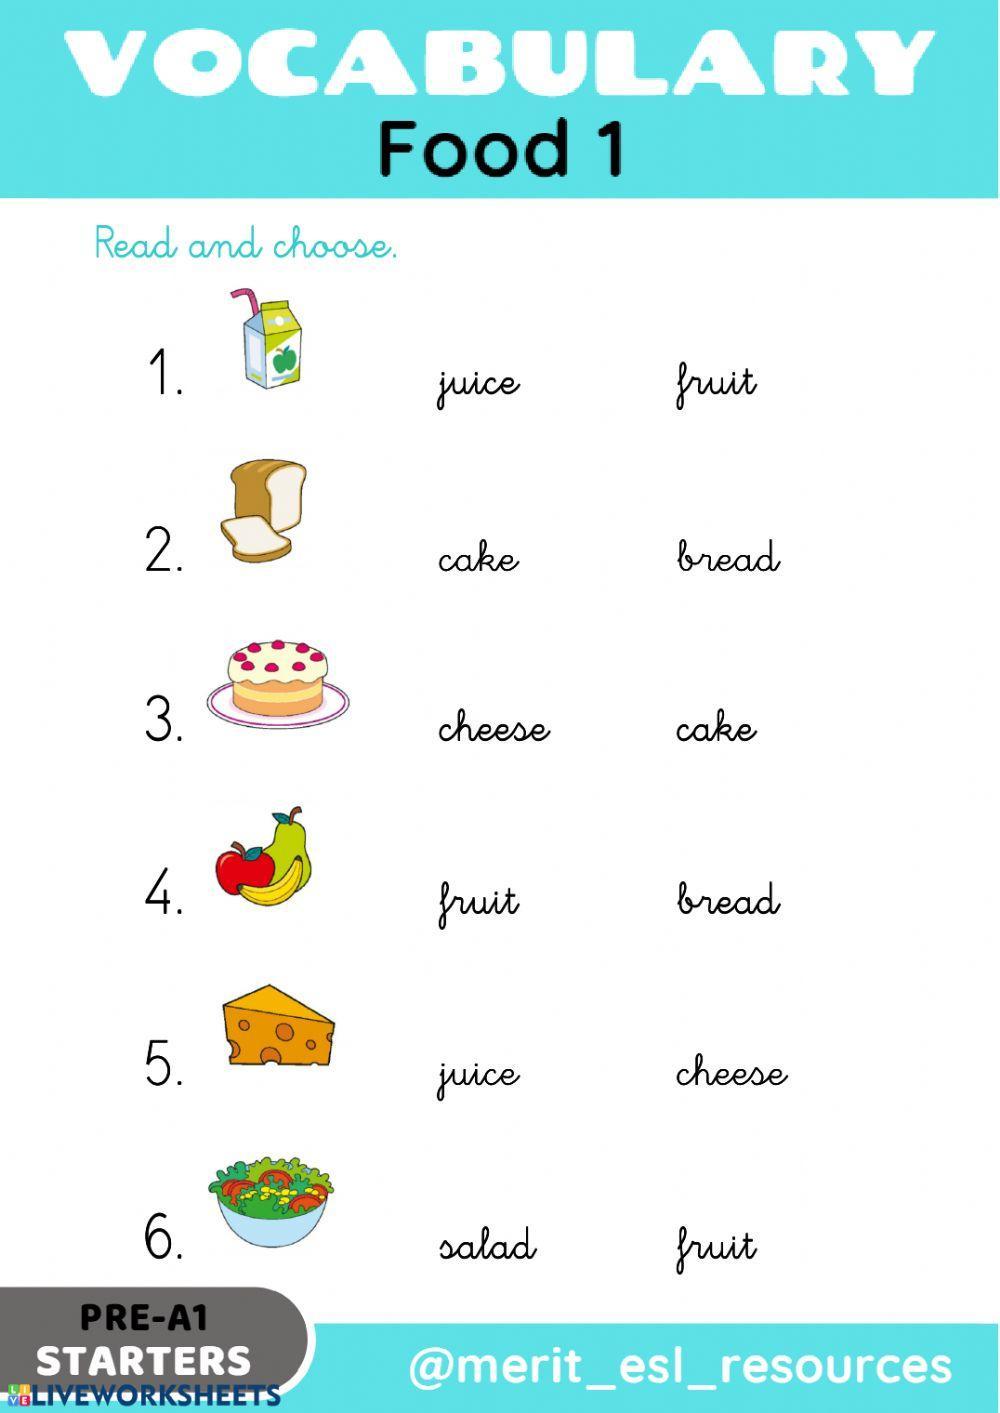 Food - Read and choose